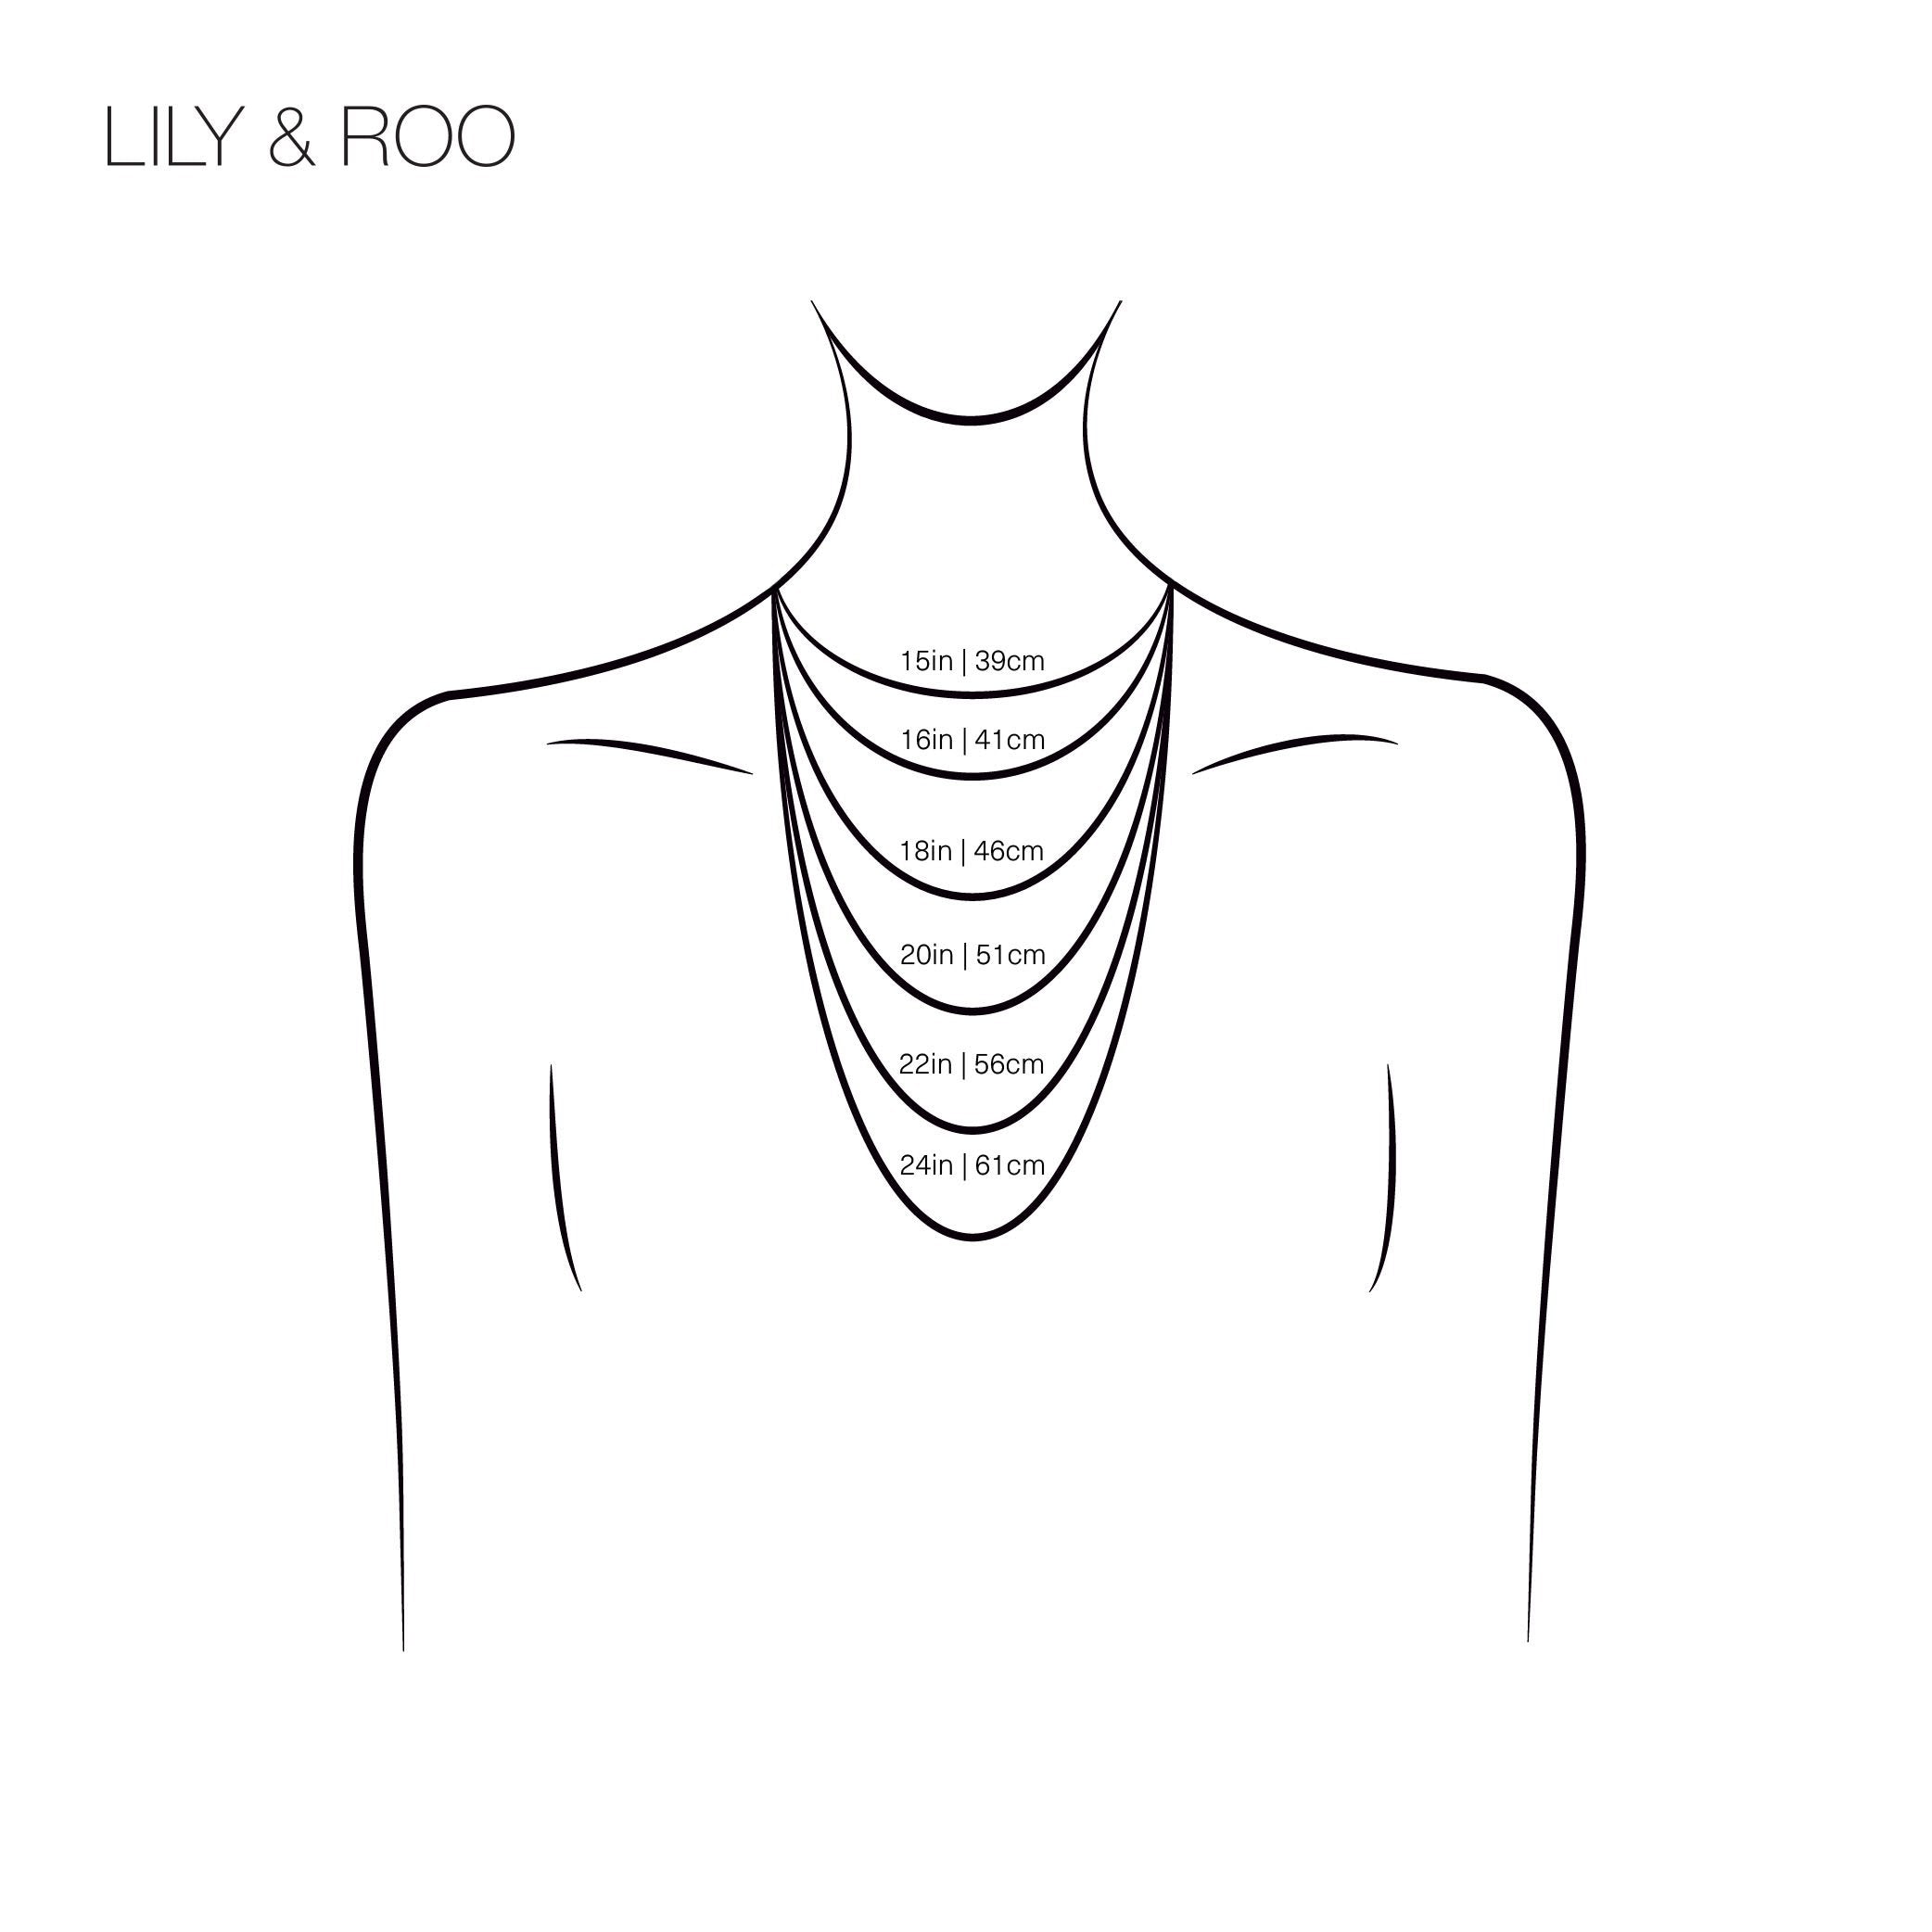 Lily & Roo necklace size guide 